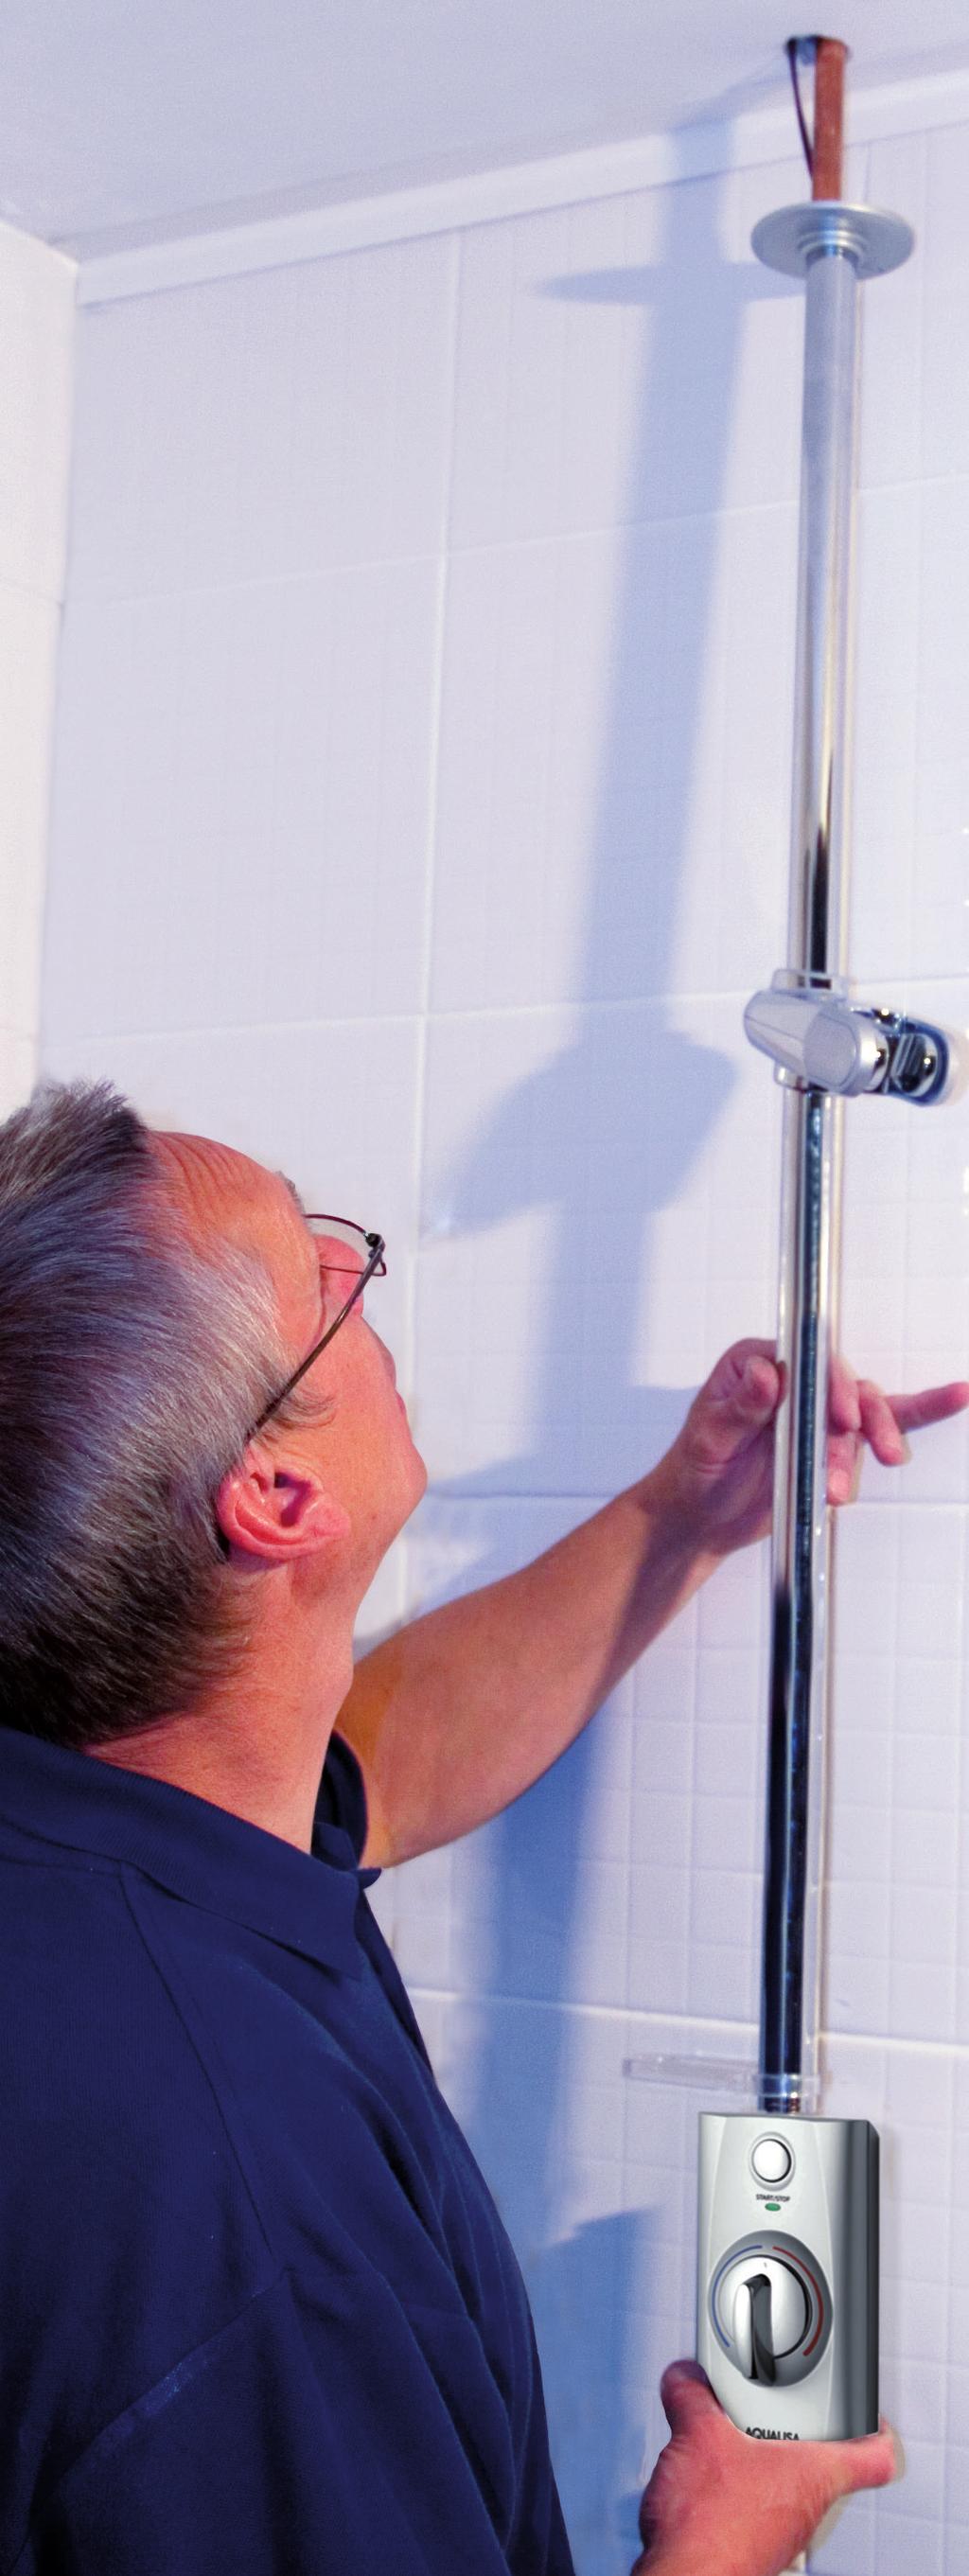 An exposed Digital shower can be installed in as little as 2 hours 5 reasons to switch to Digital 1 Quick Designed with the installer in mind Aqualisa s Digital showers can be installed in as little